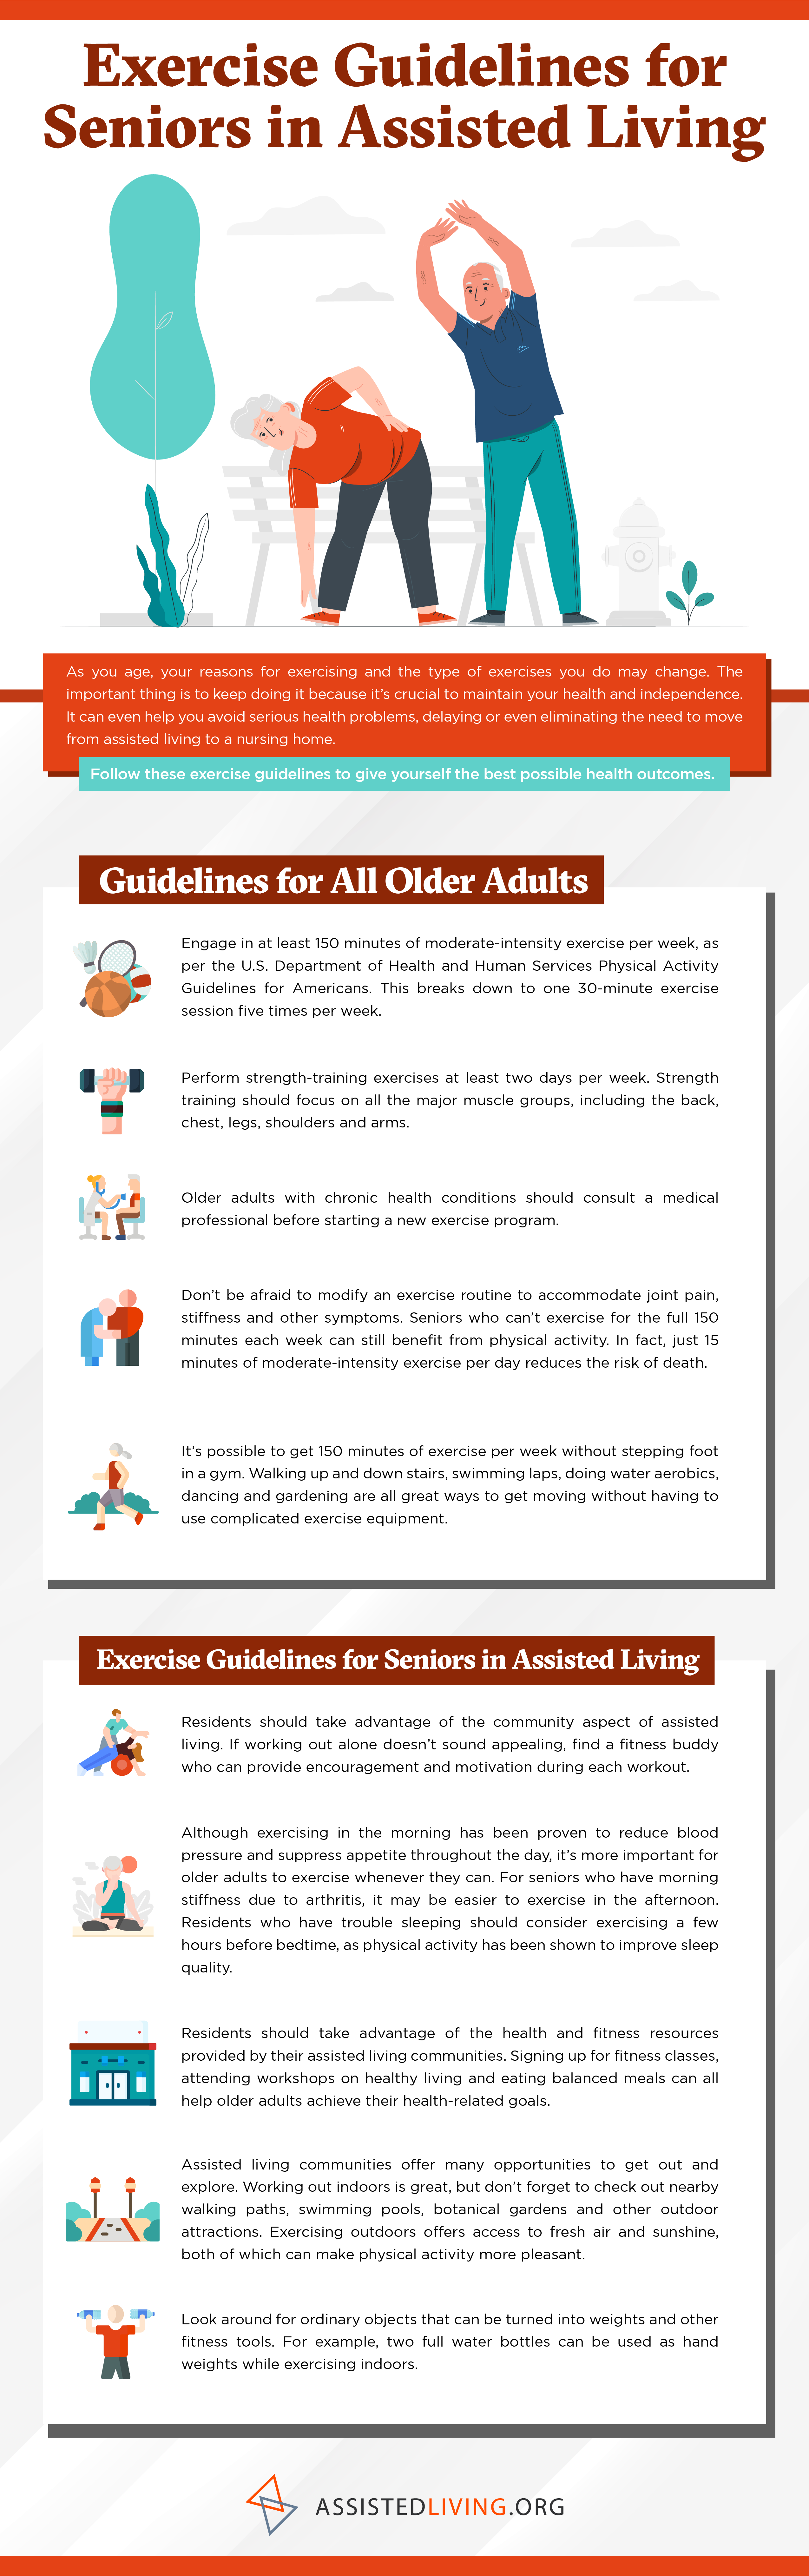 How to Market Exercise Classes for Older Adults - IDEA Health